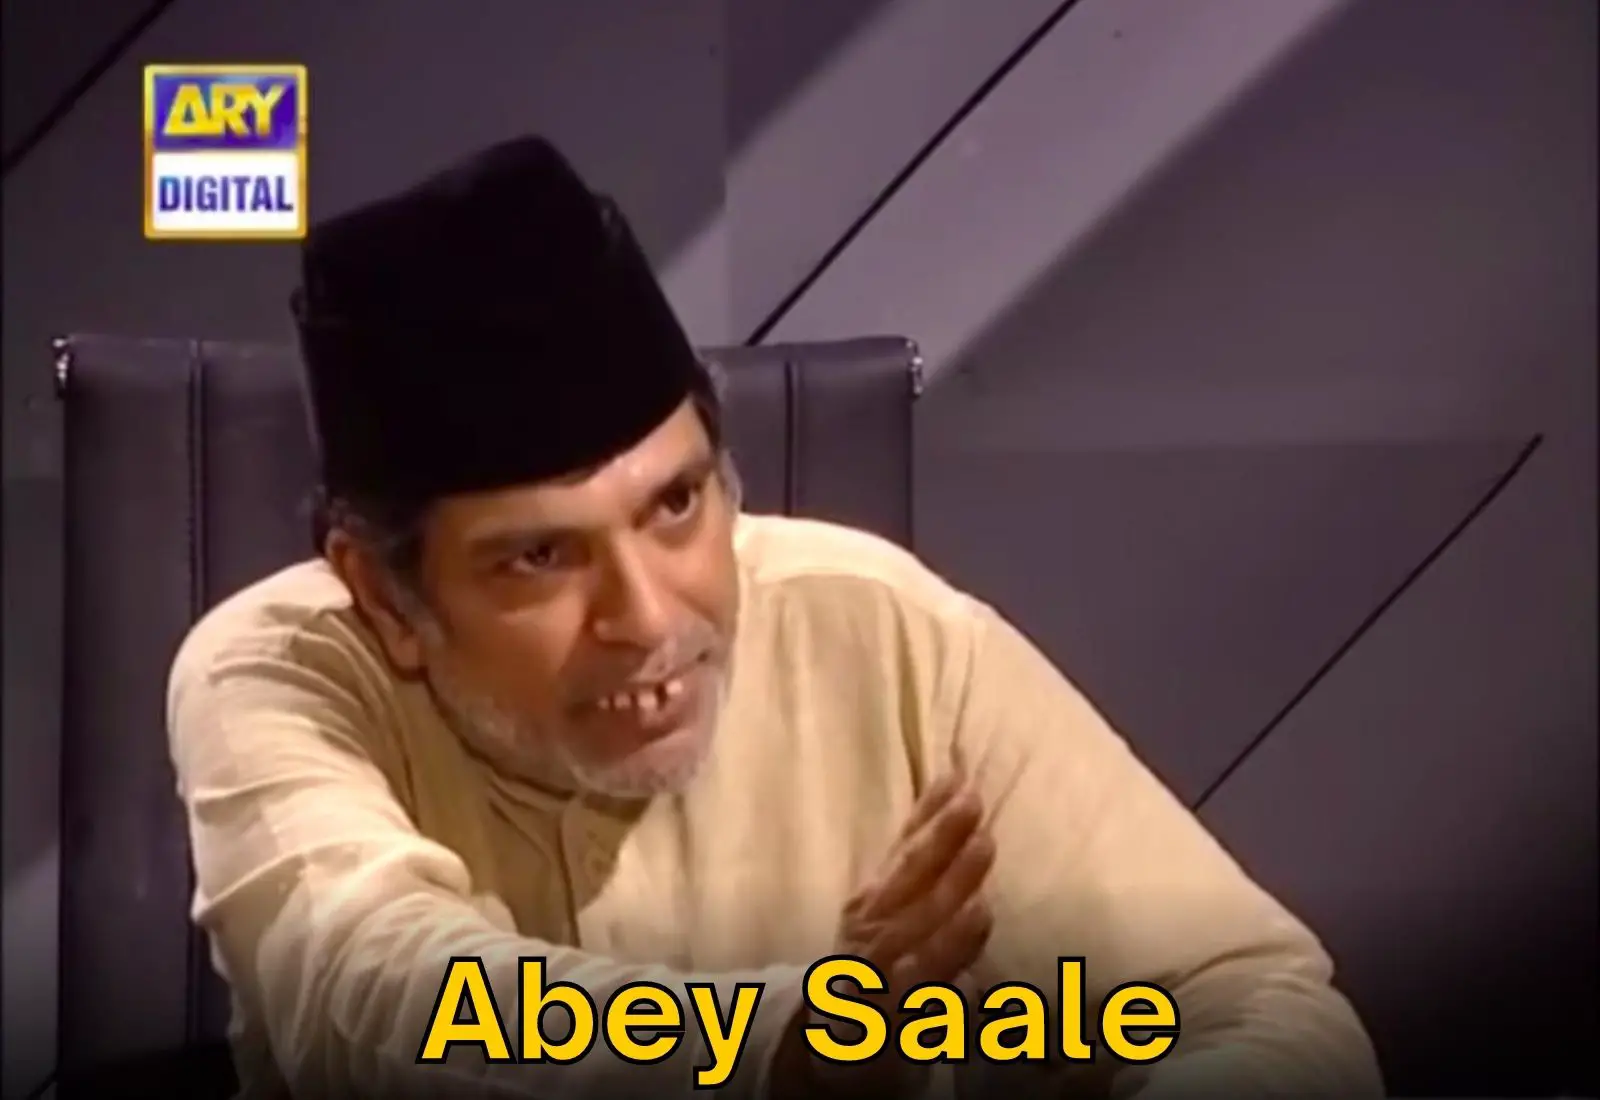 Abey Saale meme template of Moin Akhtar